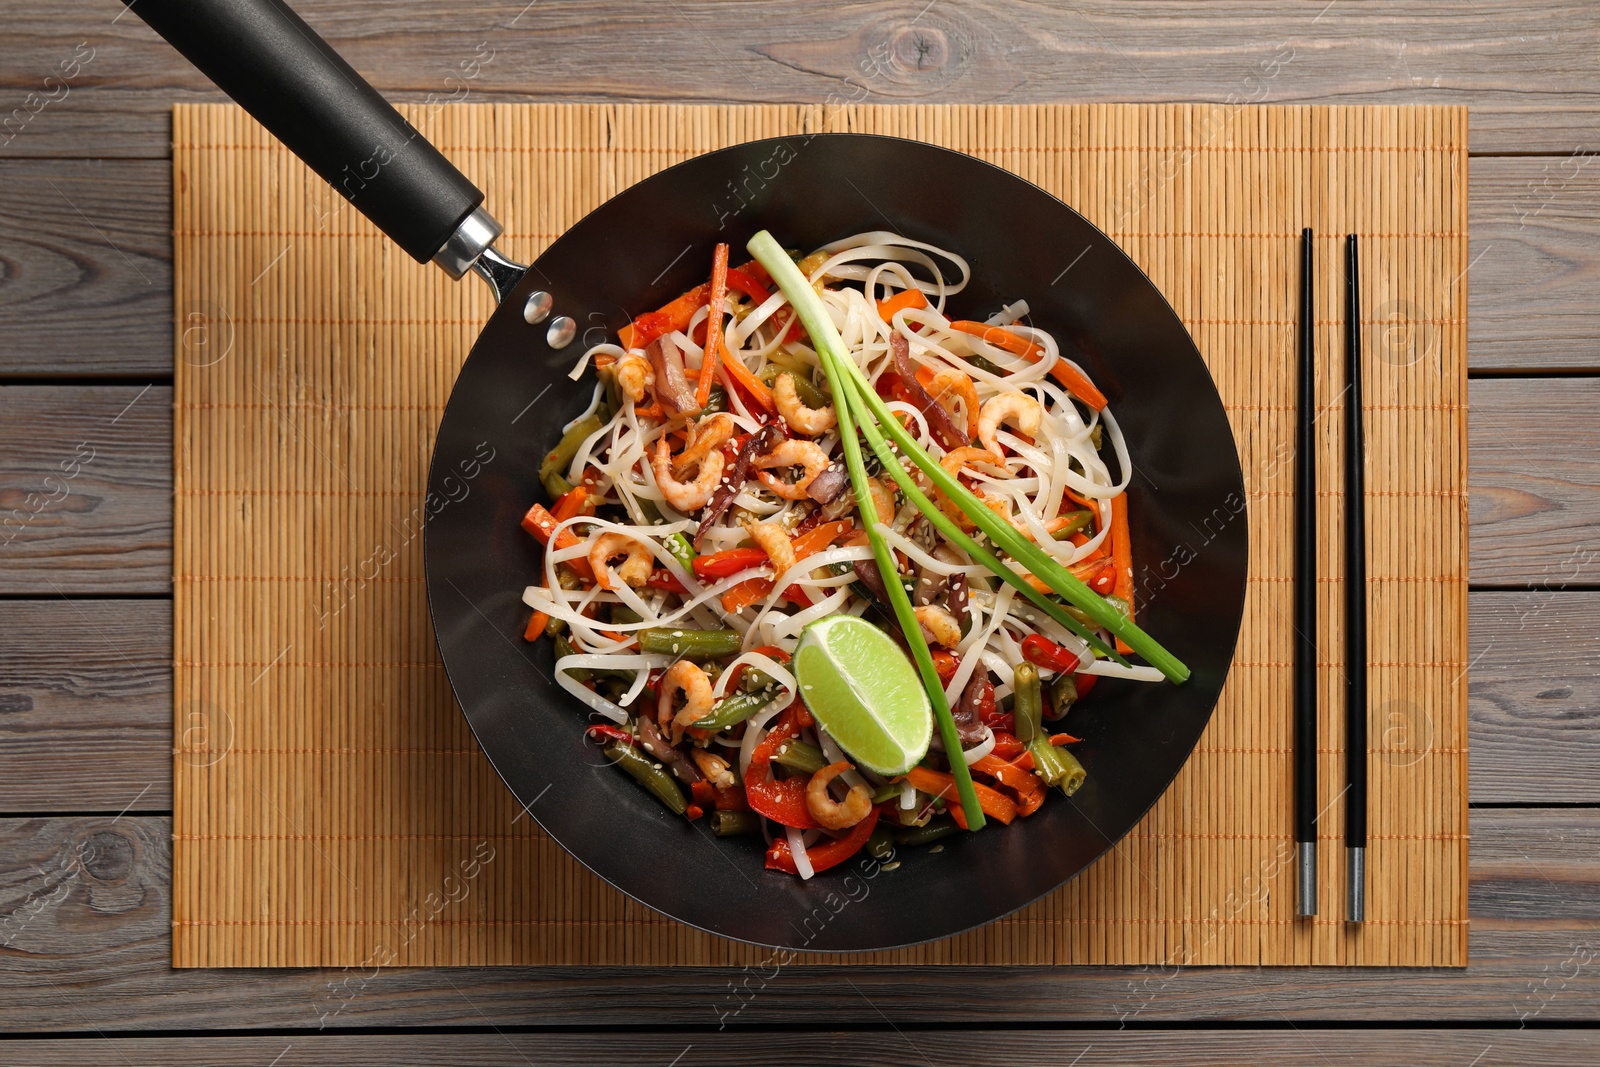 Photo of Shrimp stir fry with noodles and vegetables in wok on wooden table, top view